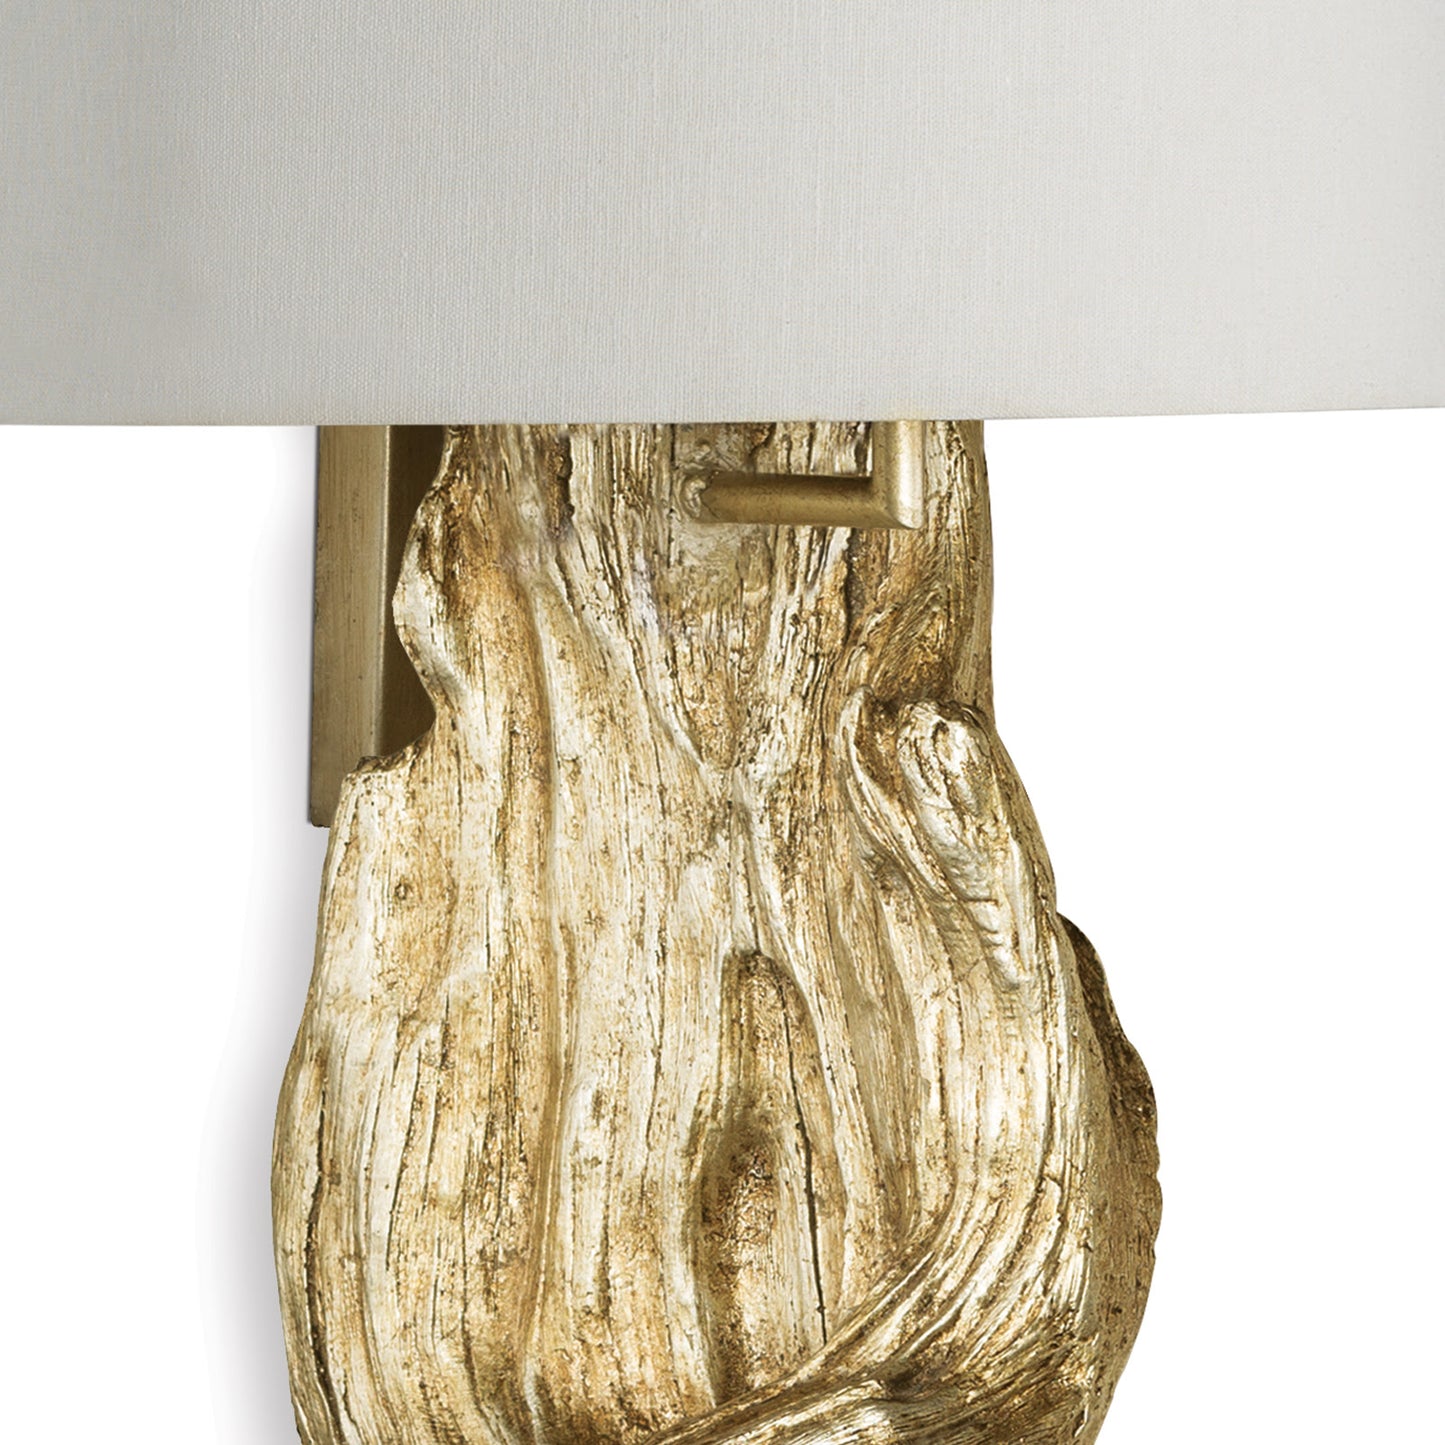 Driftwood Sconce in Antique Gold Leaf by Regina Andrew